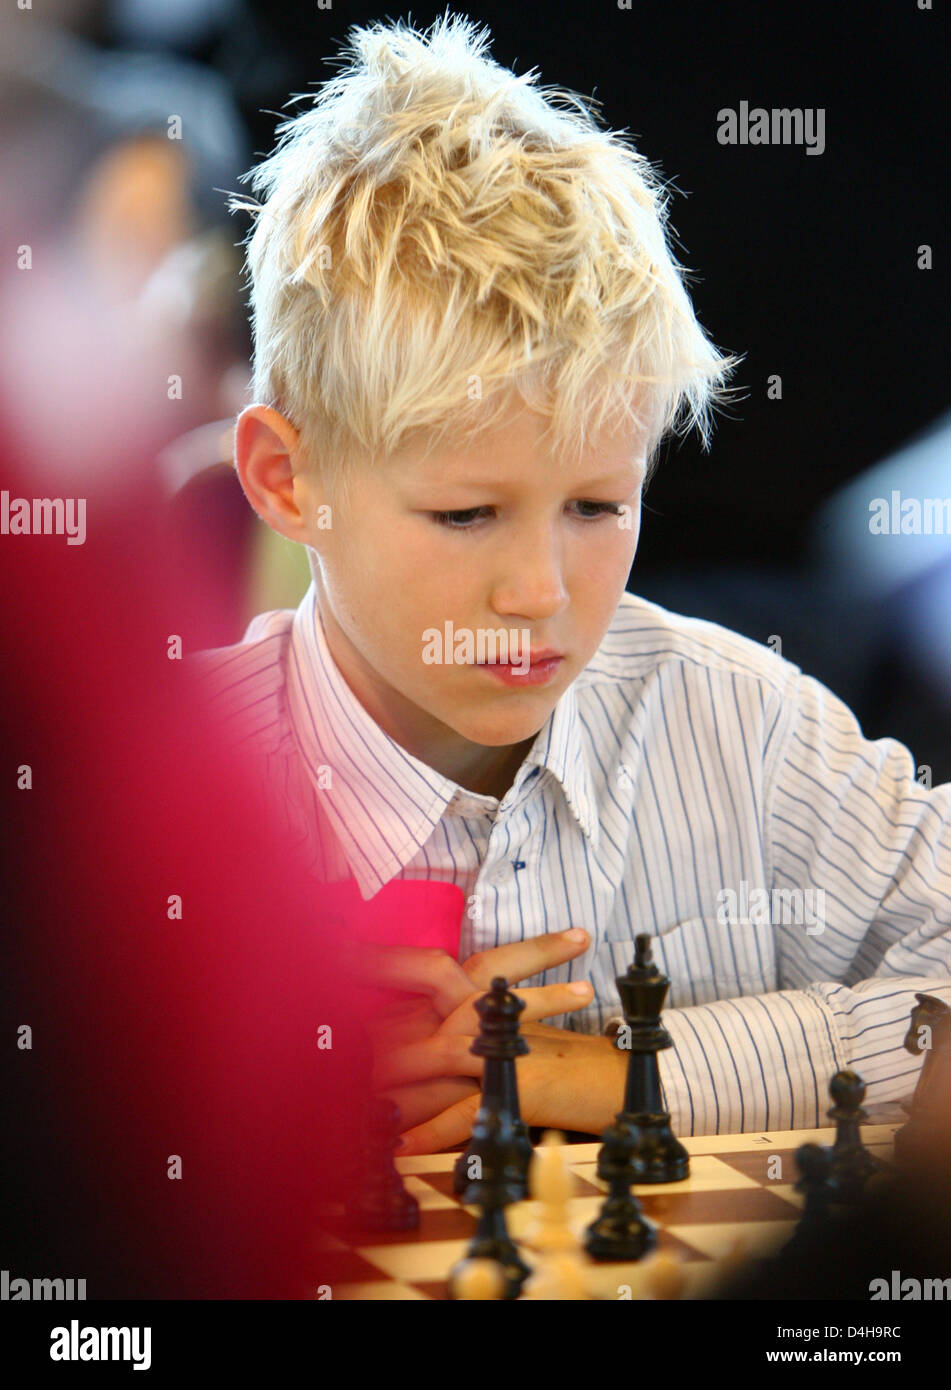 Eight-year-old Tim Wagner concentrates on his chess game during the 2008  Chess Olympiad in Dresden, Germany, 15 November 2008. His is one of the  face represented during the advertisement campaign for the